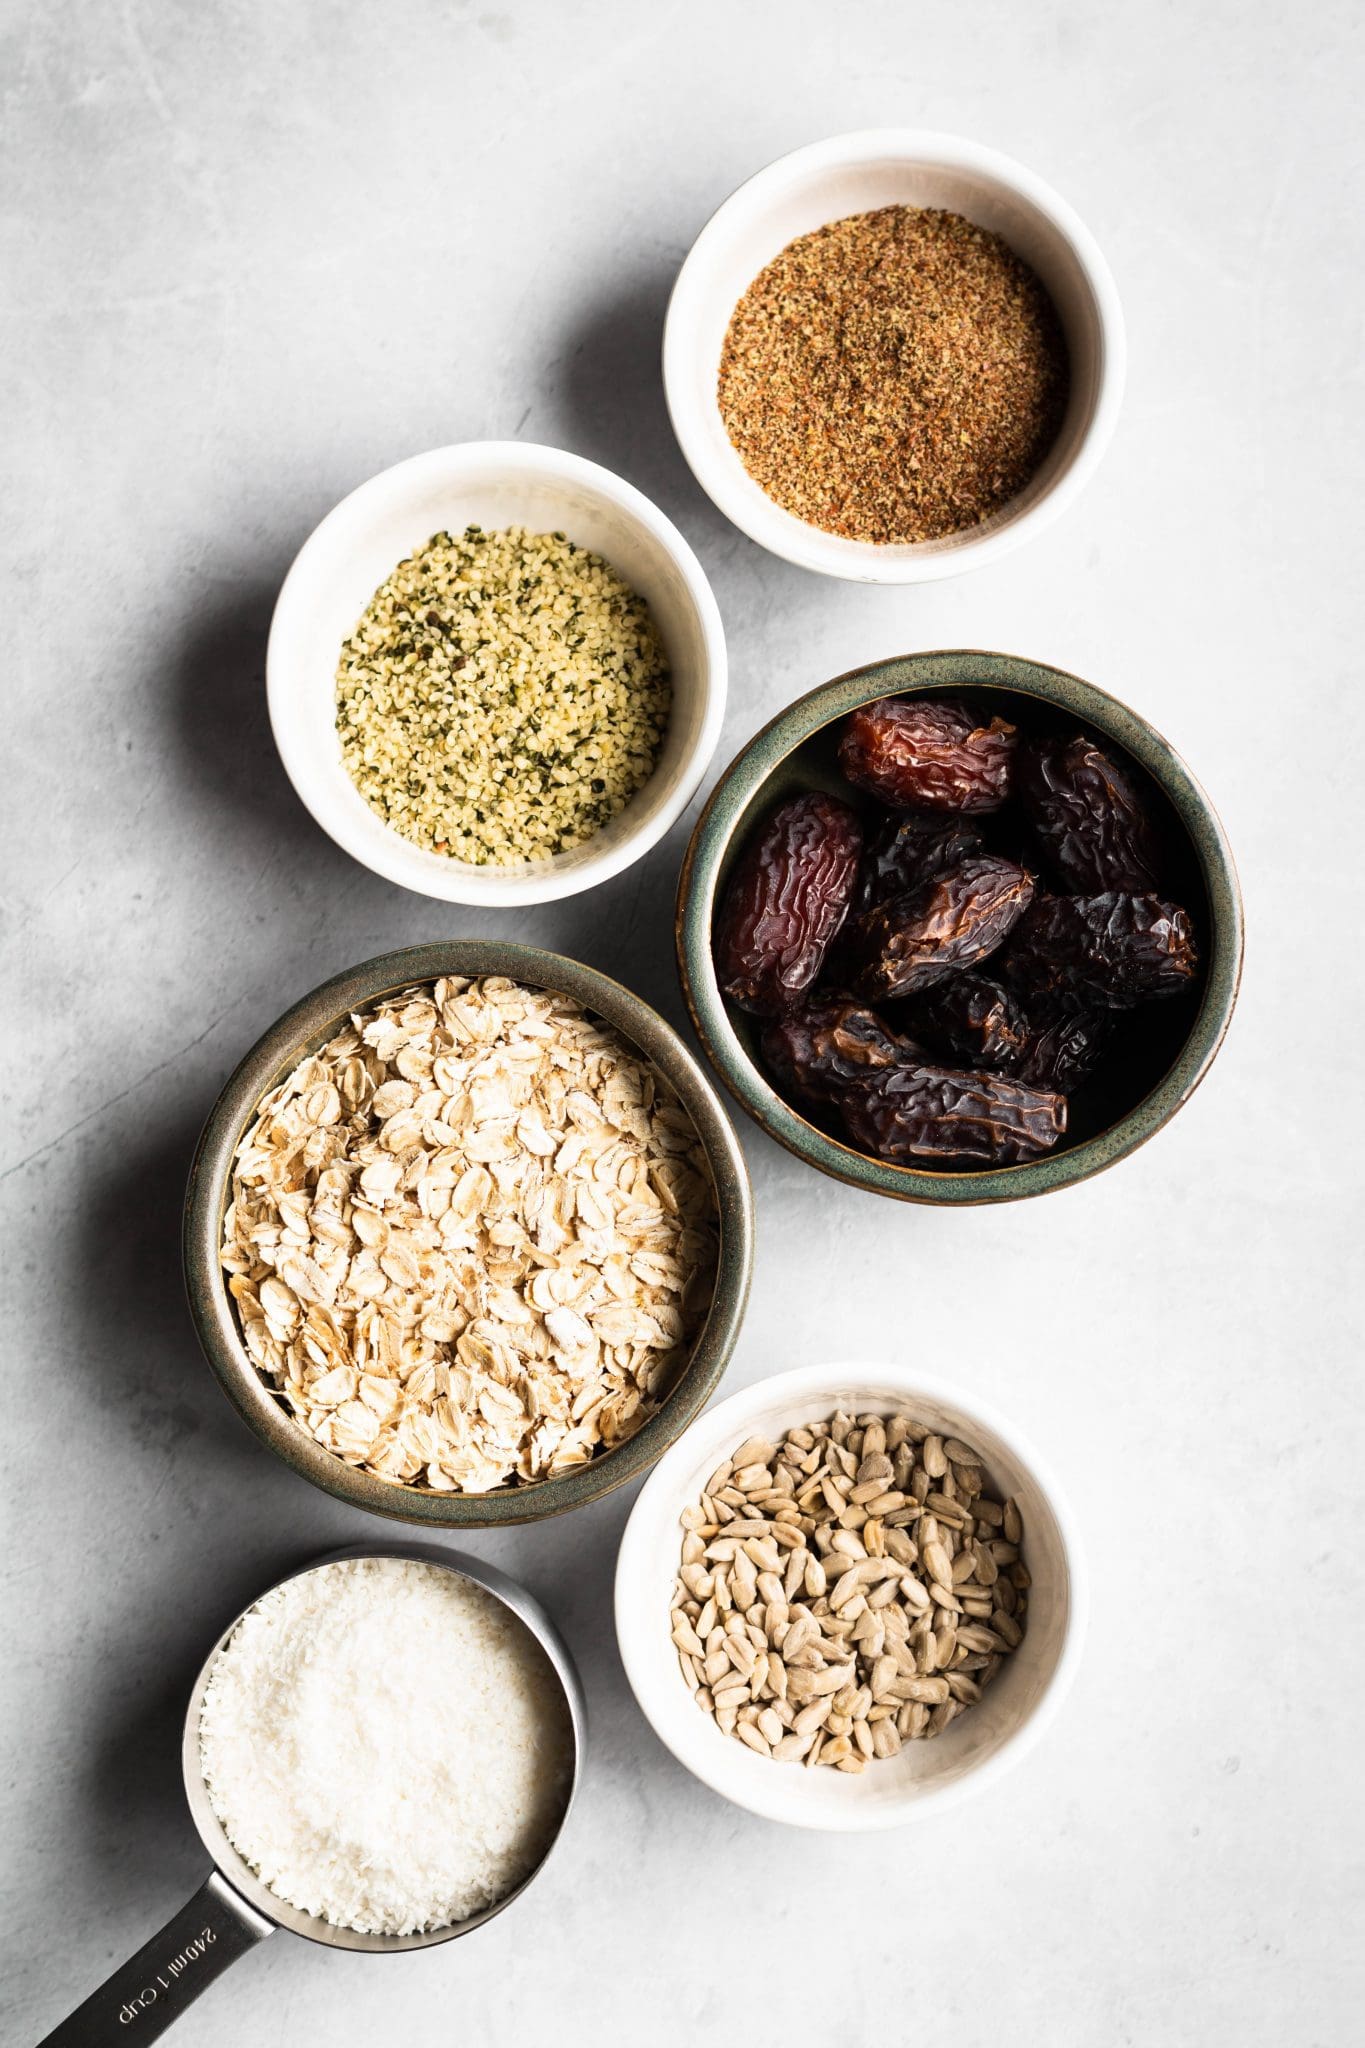 oats, dates, coconut, sunflower seeds, hemp hearts and flax seeds in bowls.